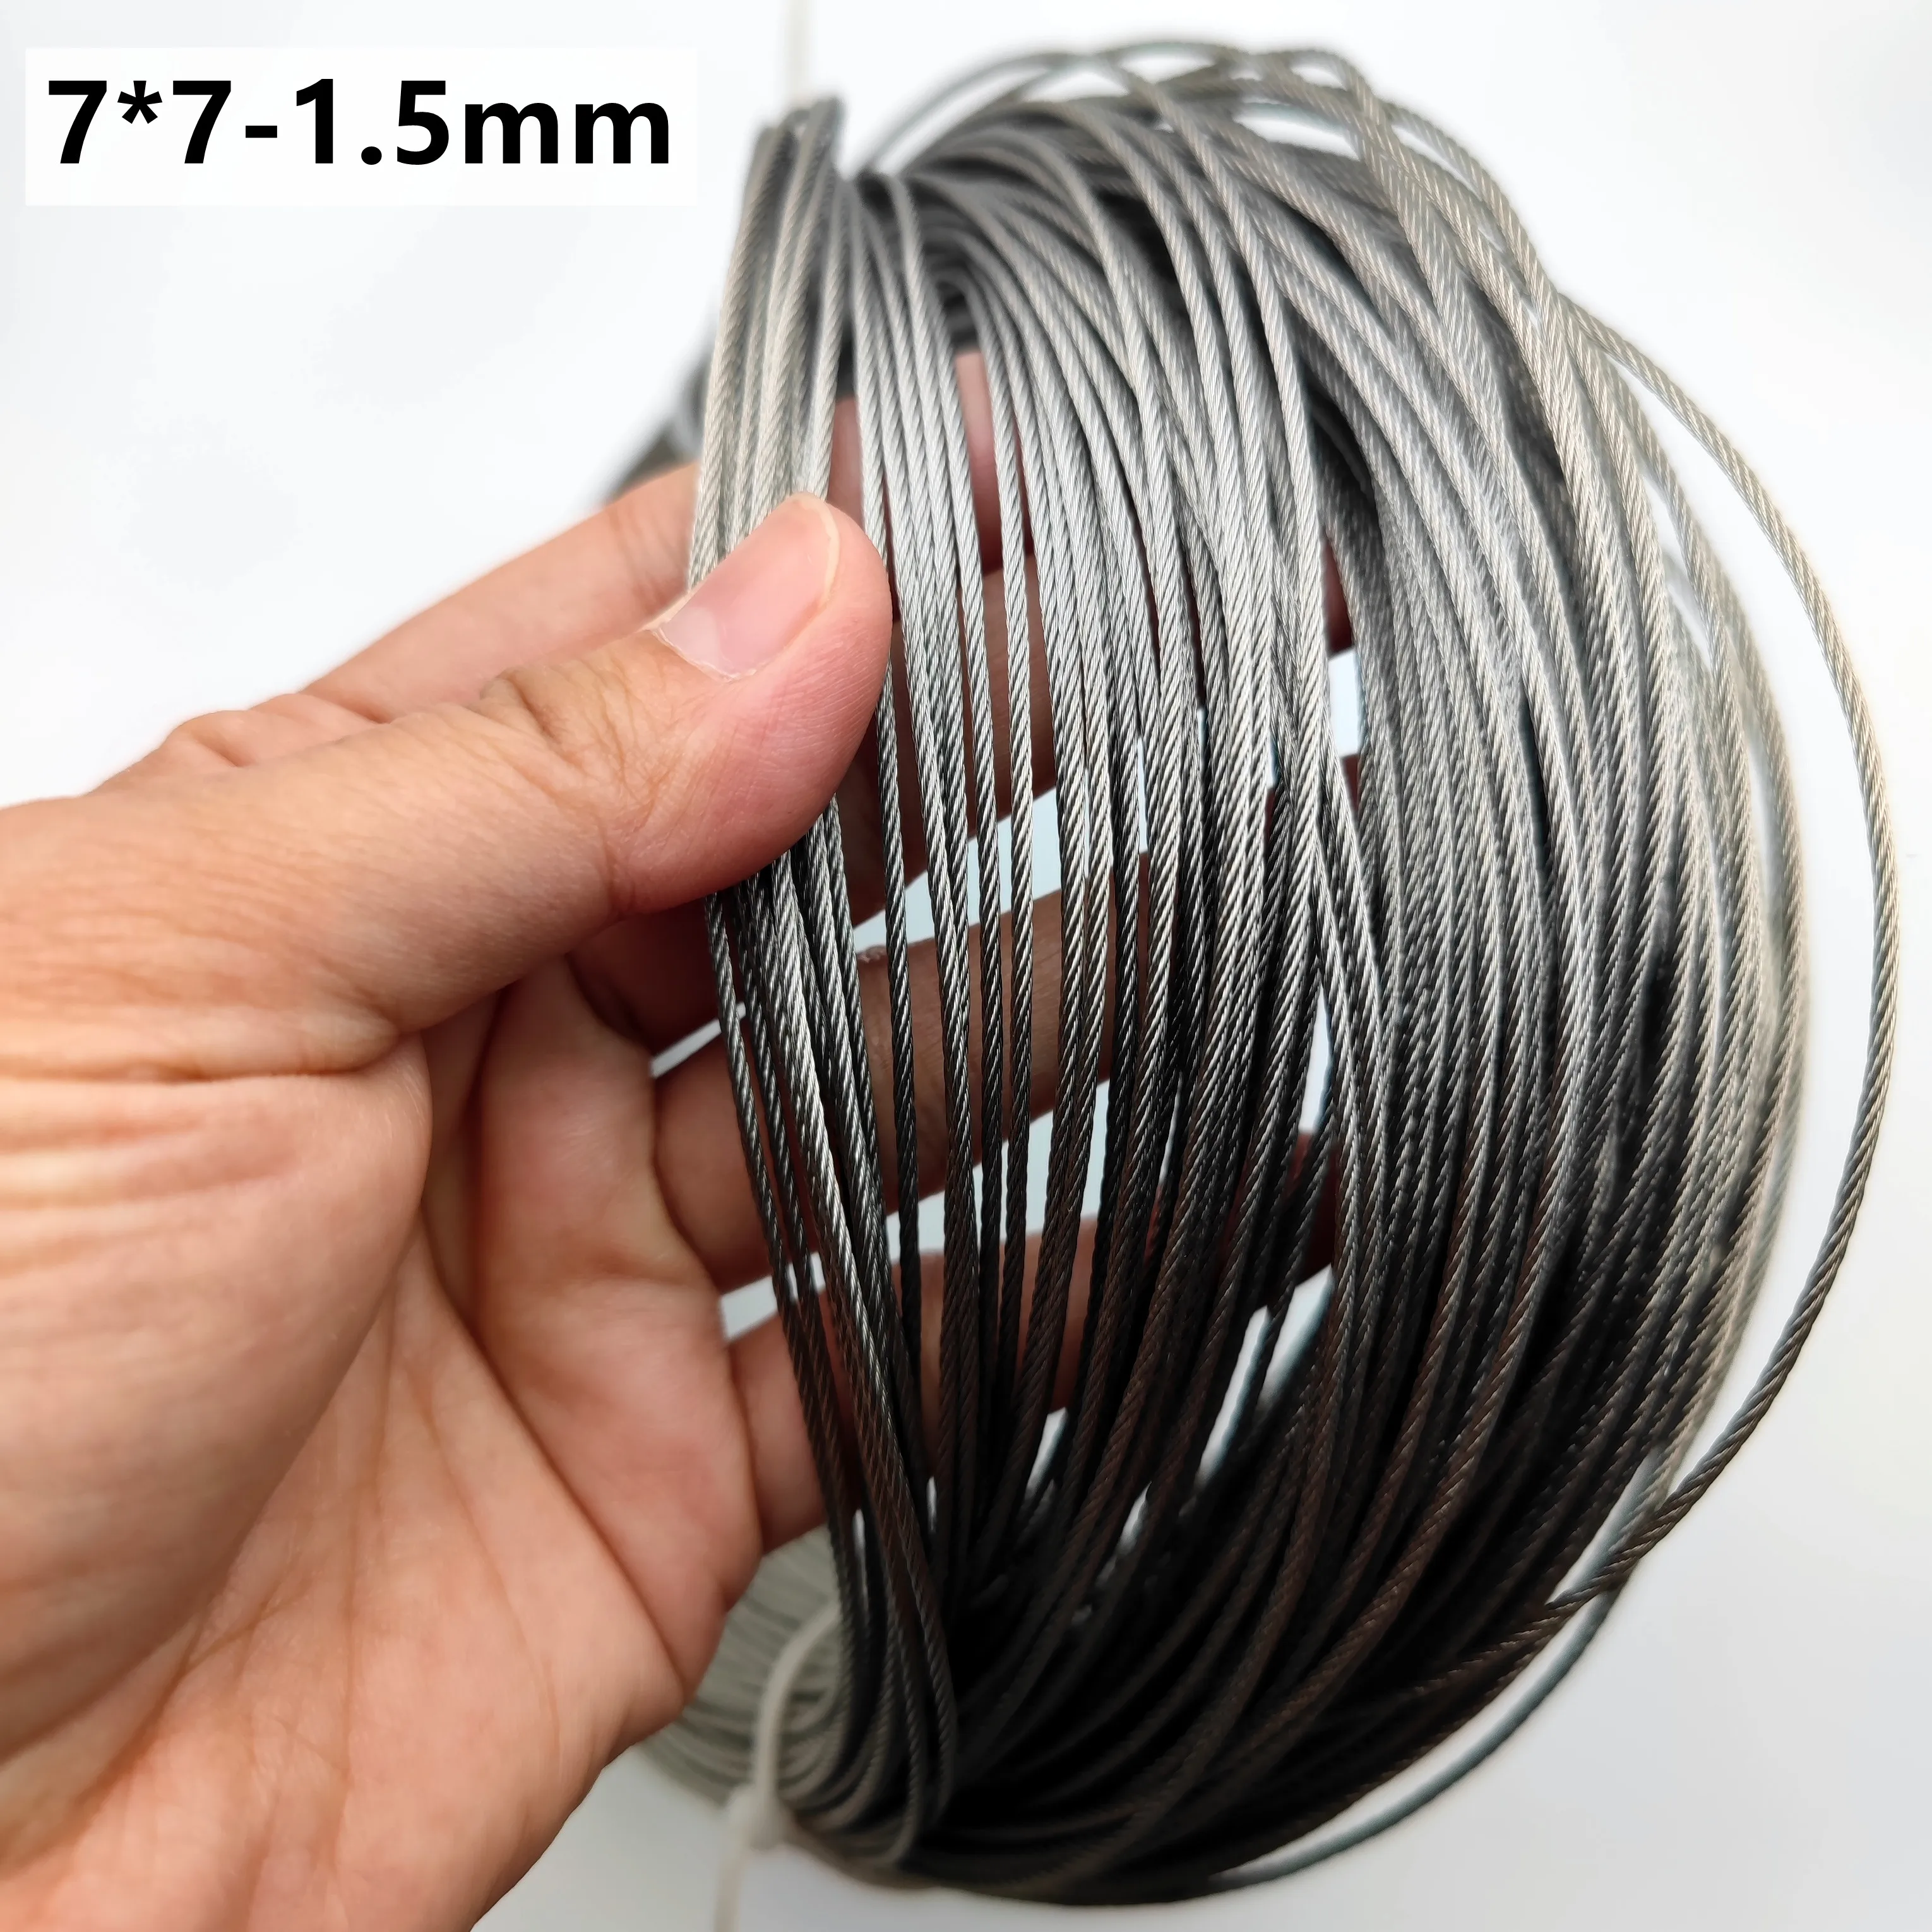 50M/100M/200M 1.5mm Diameter 7X7 Construction 304 Stainless steel Wire rope Alambre Softer Fishing Lifting Cable 5 10meters 0 5 3mm diameter 7x7 structure 304 stainless steel wire rope thin cable softer fishing lifting cable